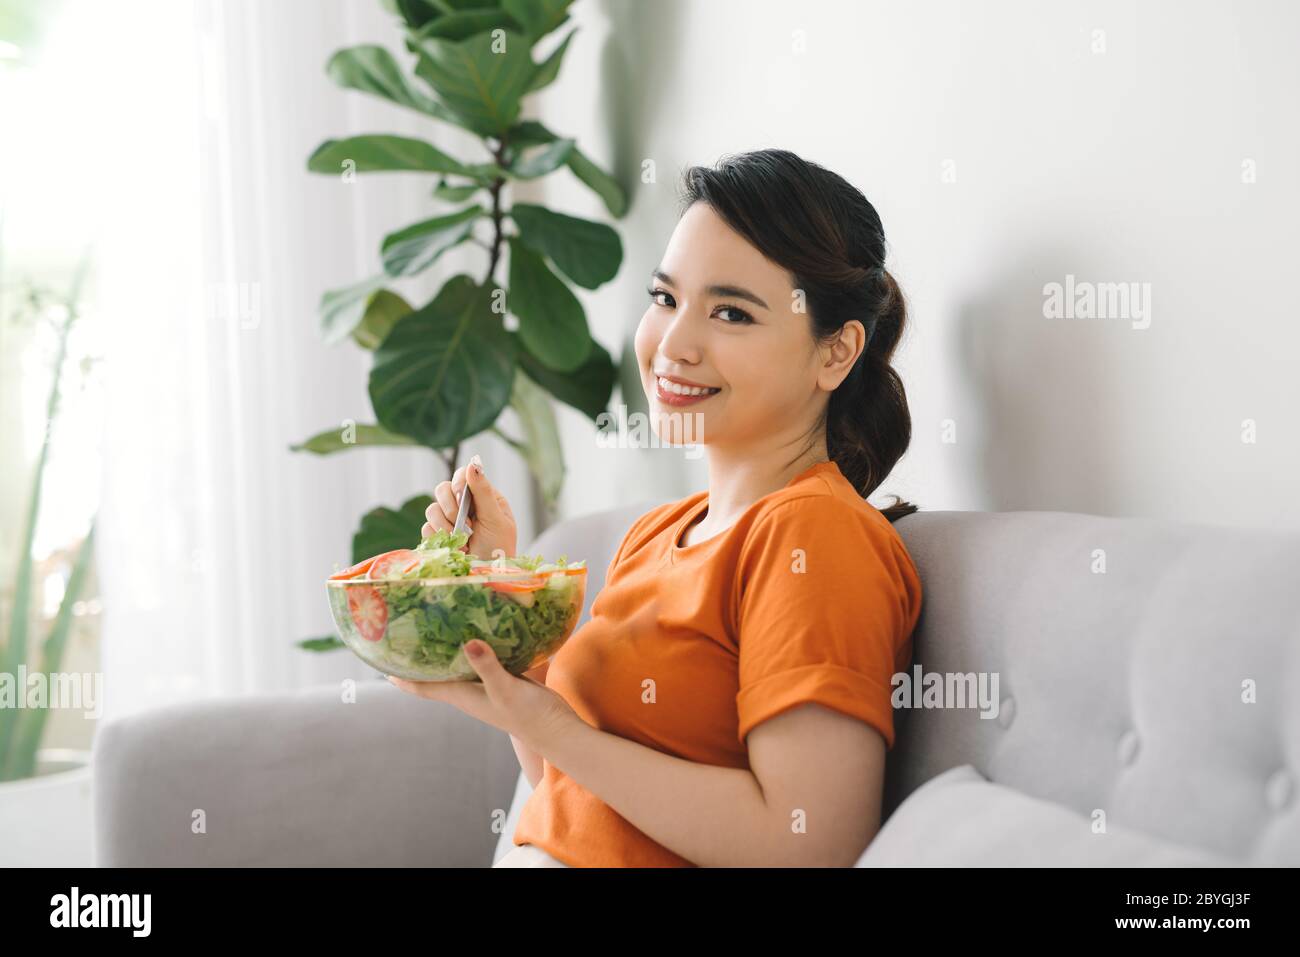 Young woman relaxing on the couch at home and eating a fresh garden salad, healthy lifestyle and nutrition concept Stock Photo